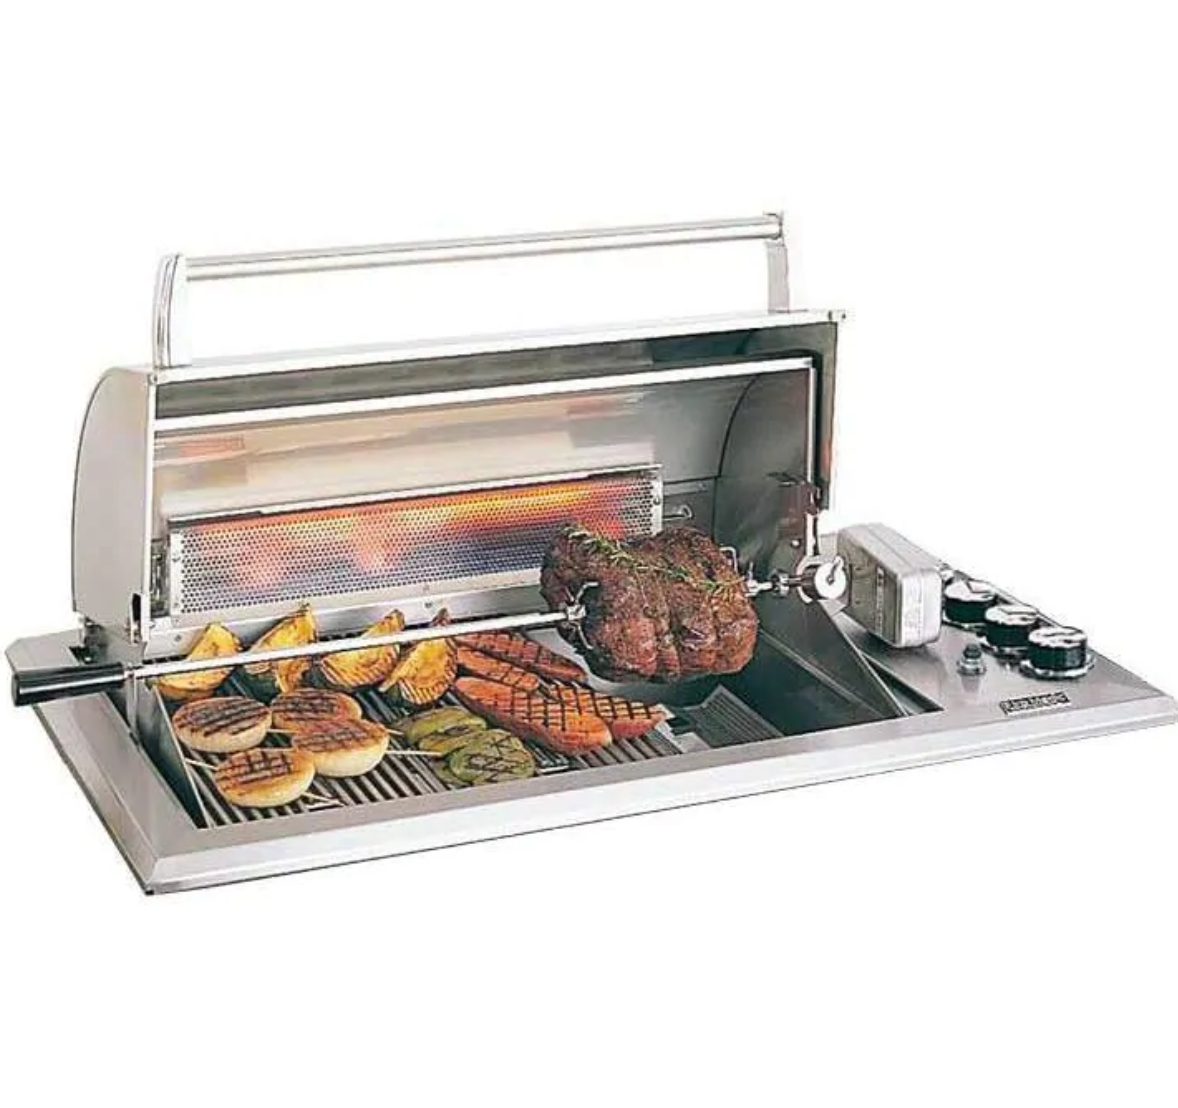 Fire Magic Classic Built-In Natural GAS Power Burner w/ Stainless Steel Grid - 19-KB1N-0 - Fire Magic Grills